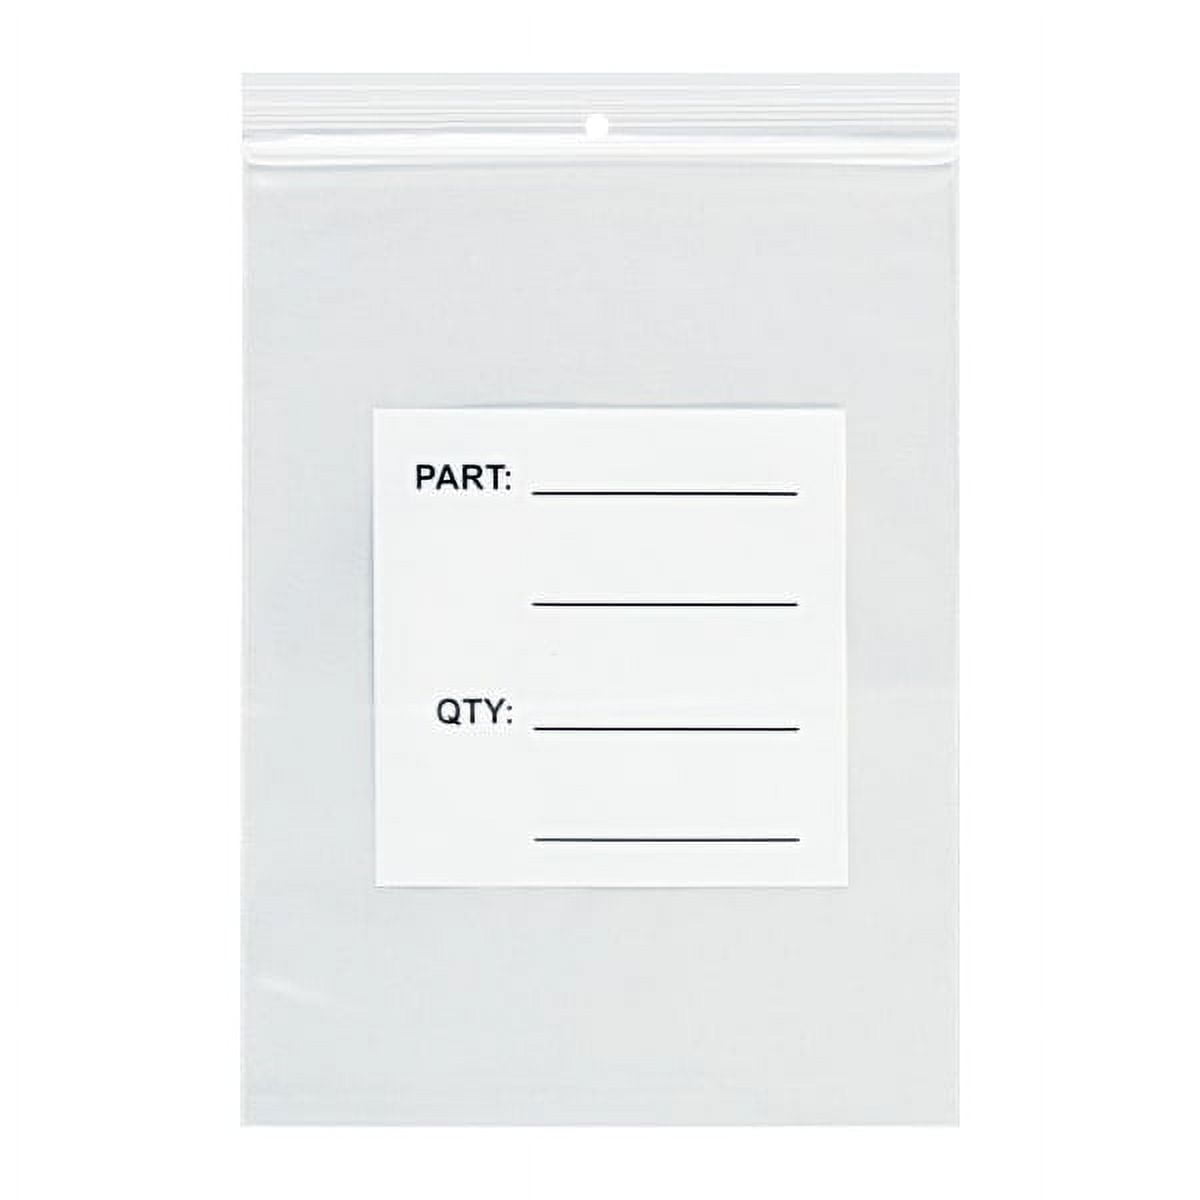 Pb12009 9 X 12 In. 4 Mil Parts Bags With Hang Holes - Pack Of 1000